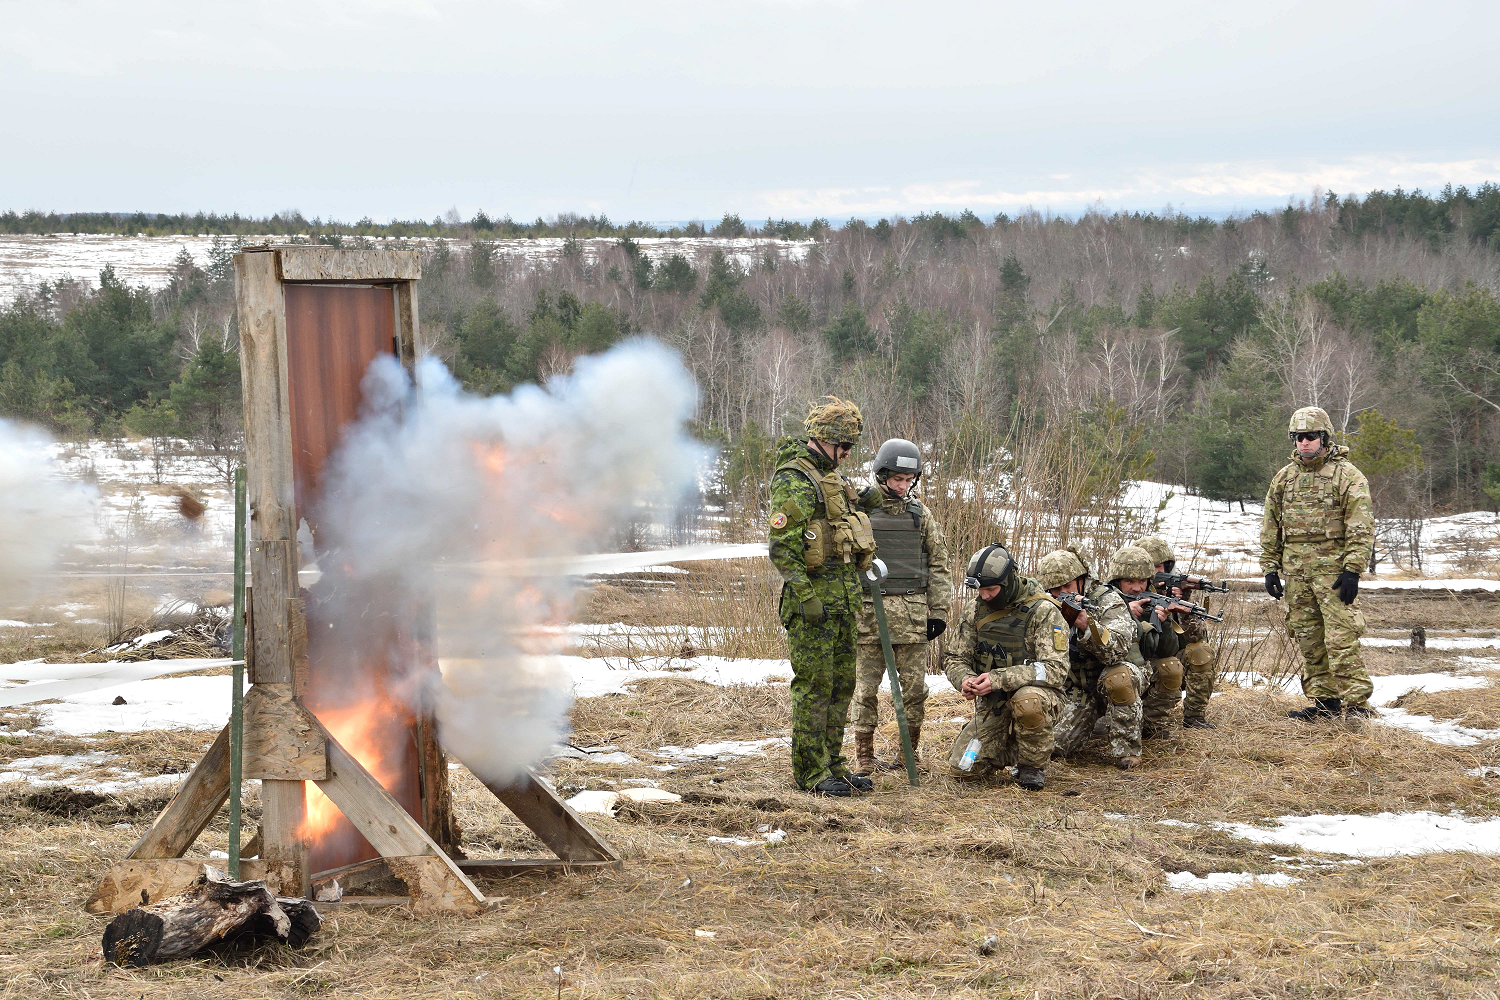 February 23, 2017. A Ukrainian soldier detonates a charge during explosive door breaching practice with Canadian and American combat engineer instructors of Joint Task Force – Ukraine during Operation UNIFIER at the International Peacekeeping and Security Centre in Starychi, Ukraine on February 23, 2017. (Photo: Joint Task Force – Ukraine)